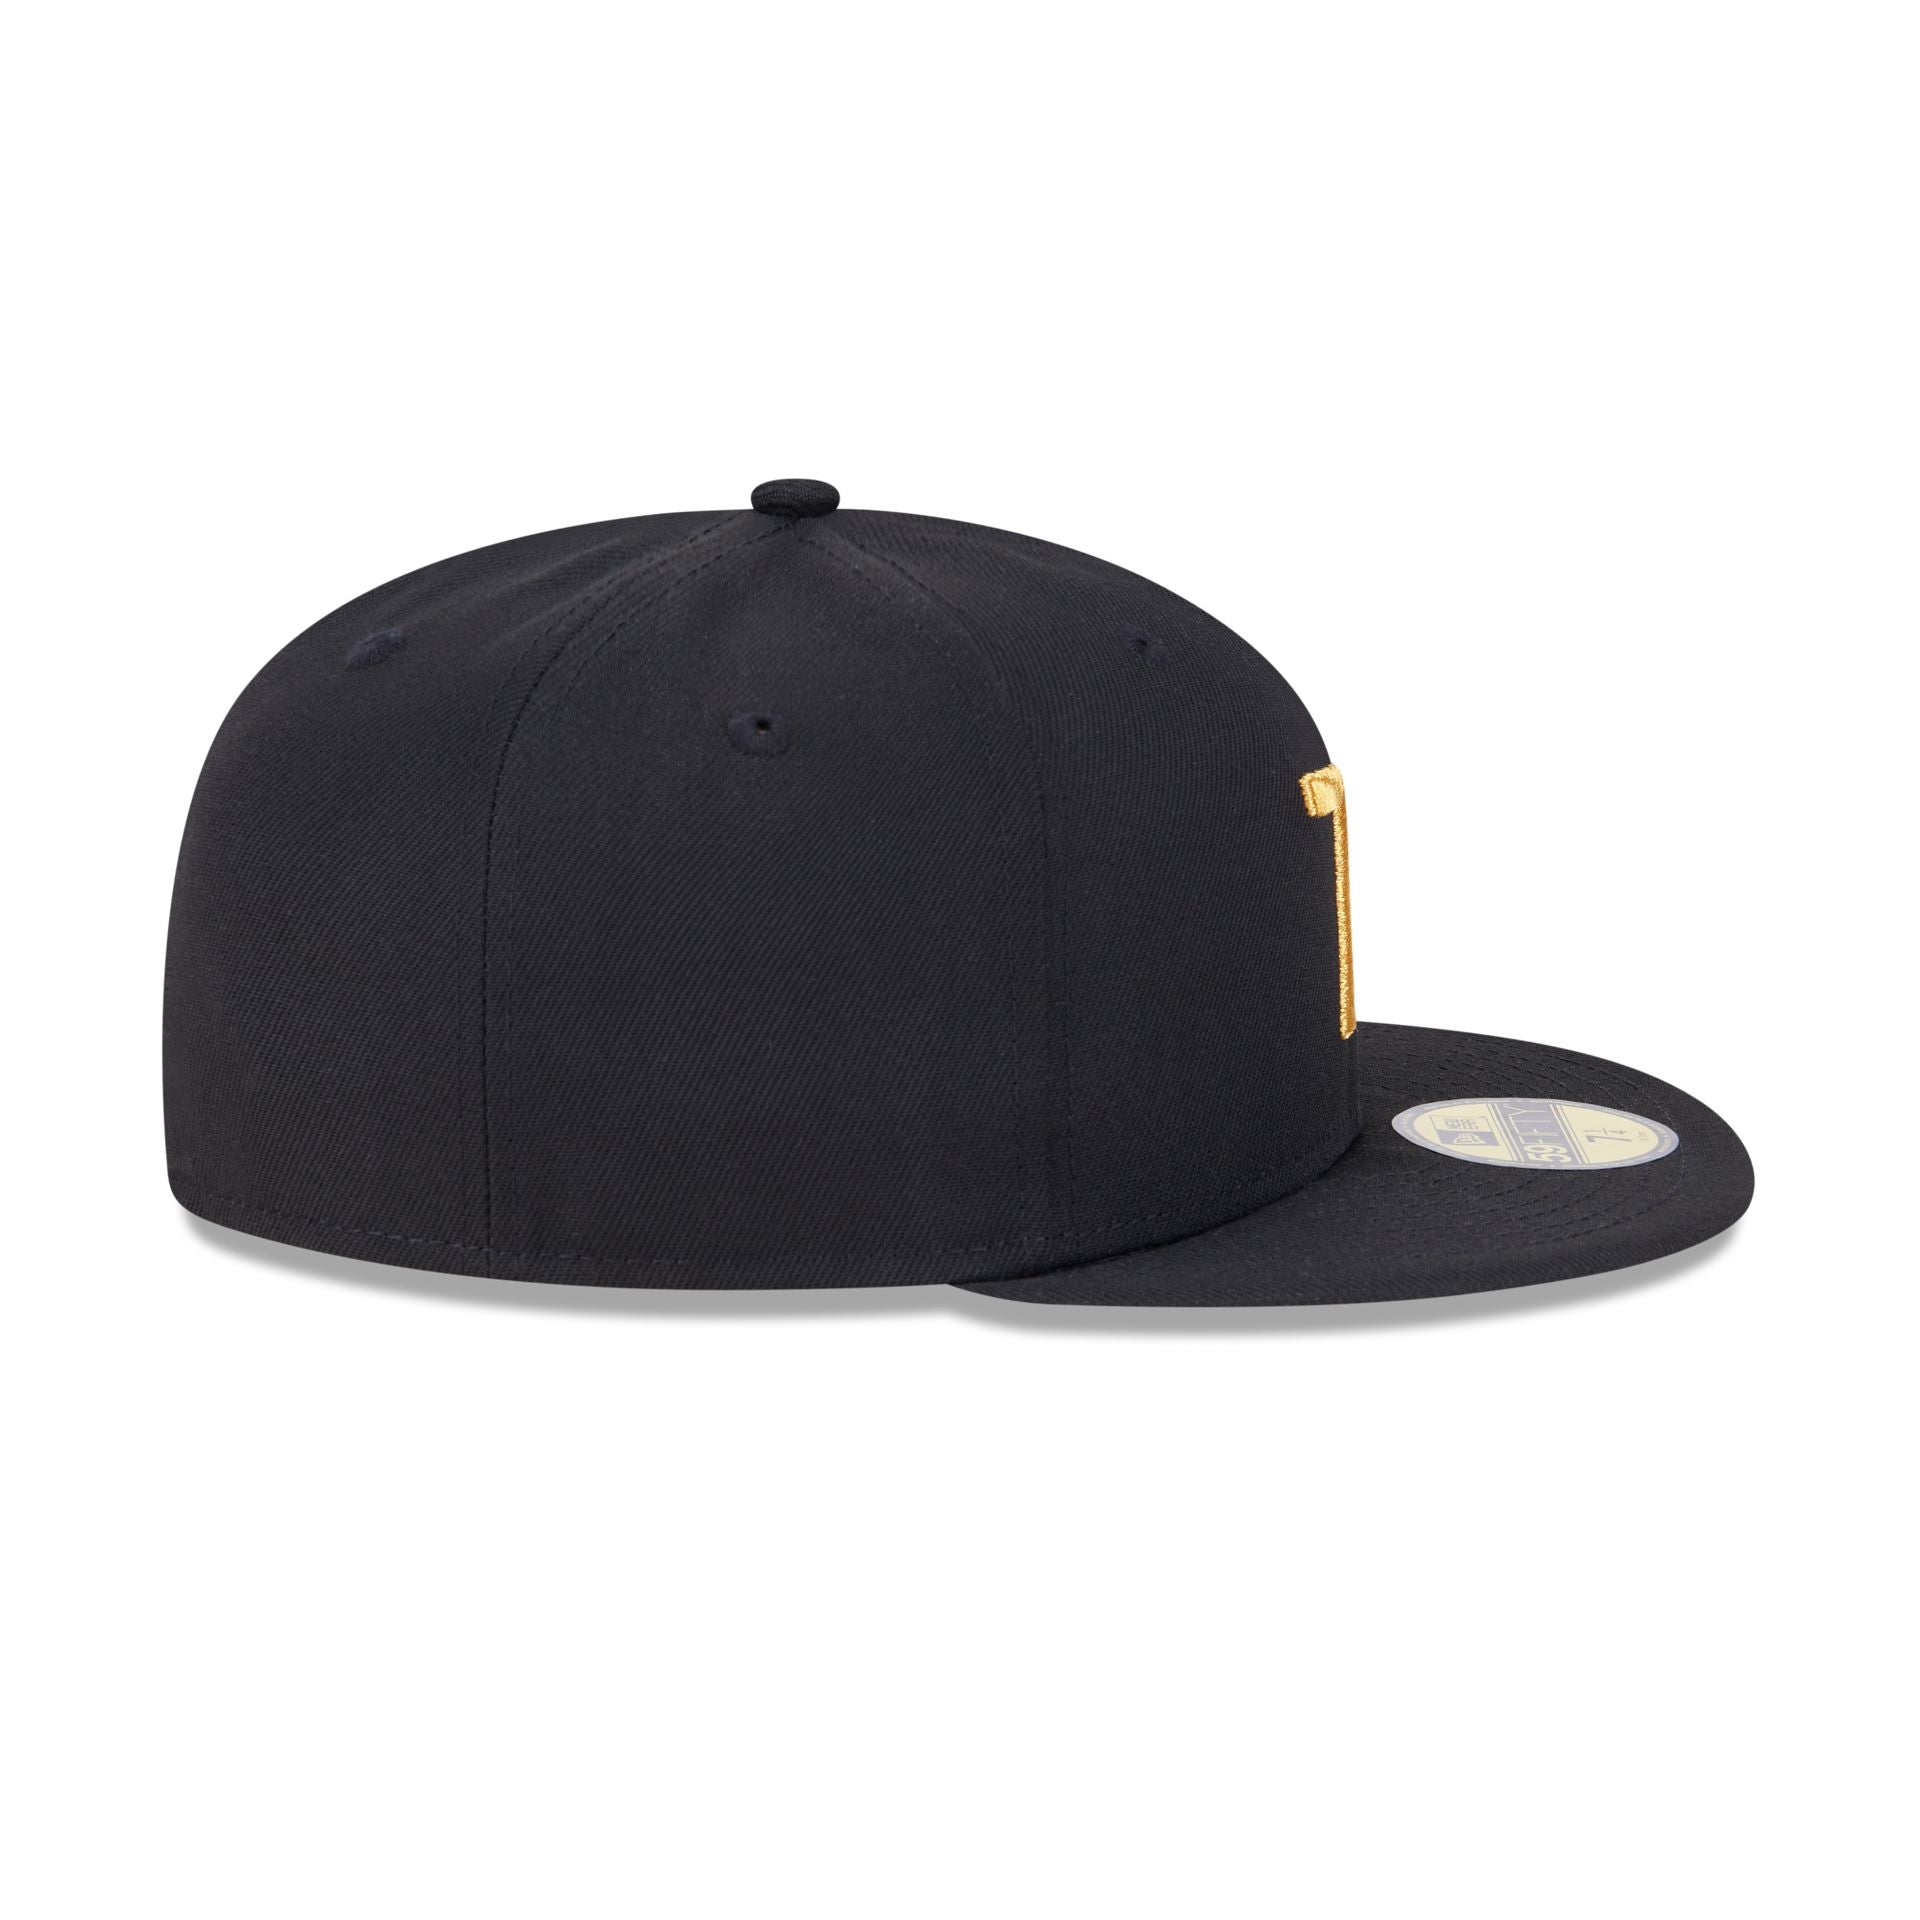 New Era Cap Signature Size 7 1/4 Black 59FIFTY Fitted